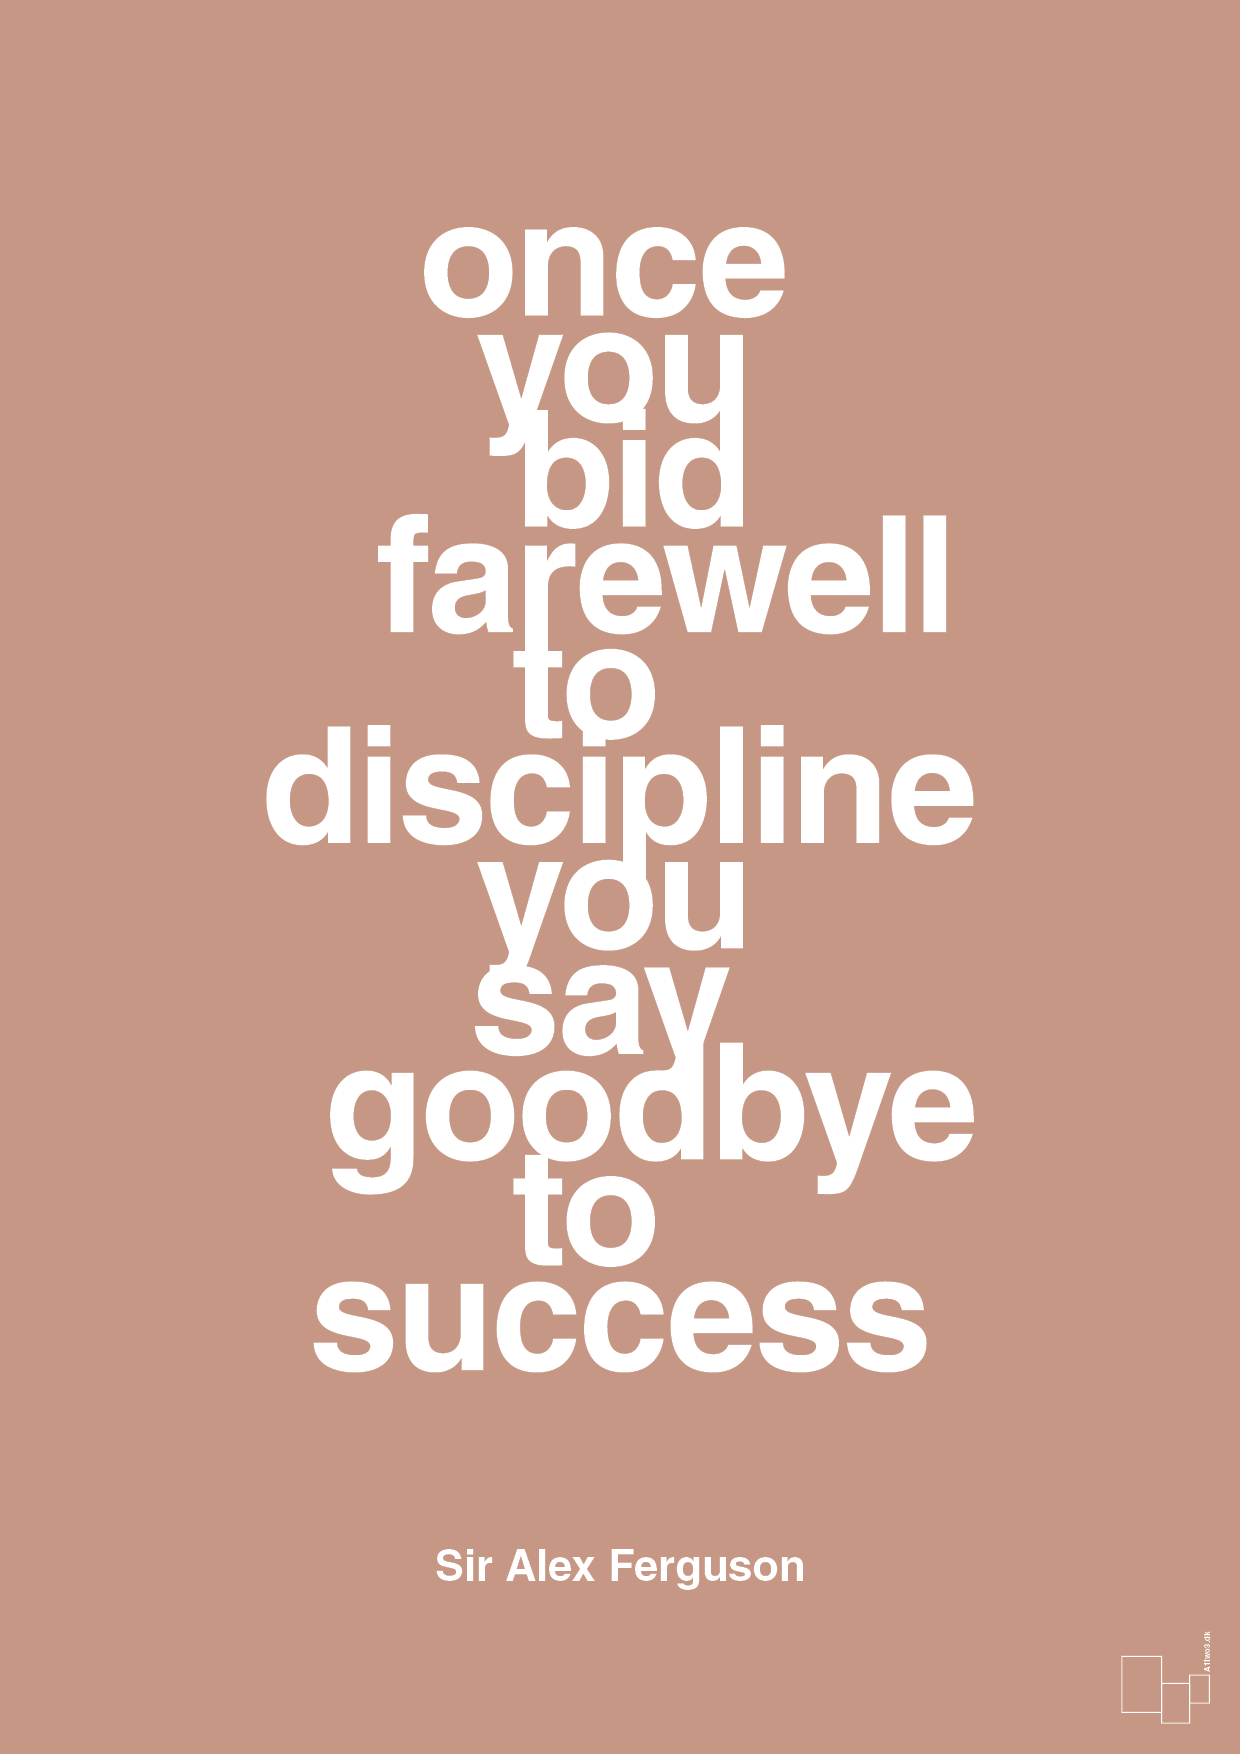 once you bid farewell to discipline you say goodbye to success - Plakat med Citater i Powder